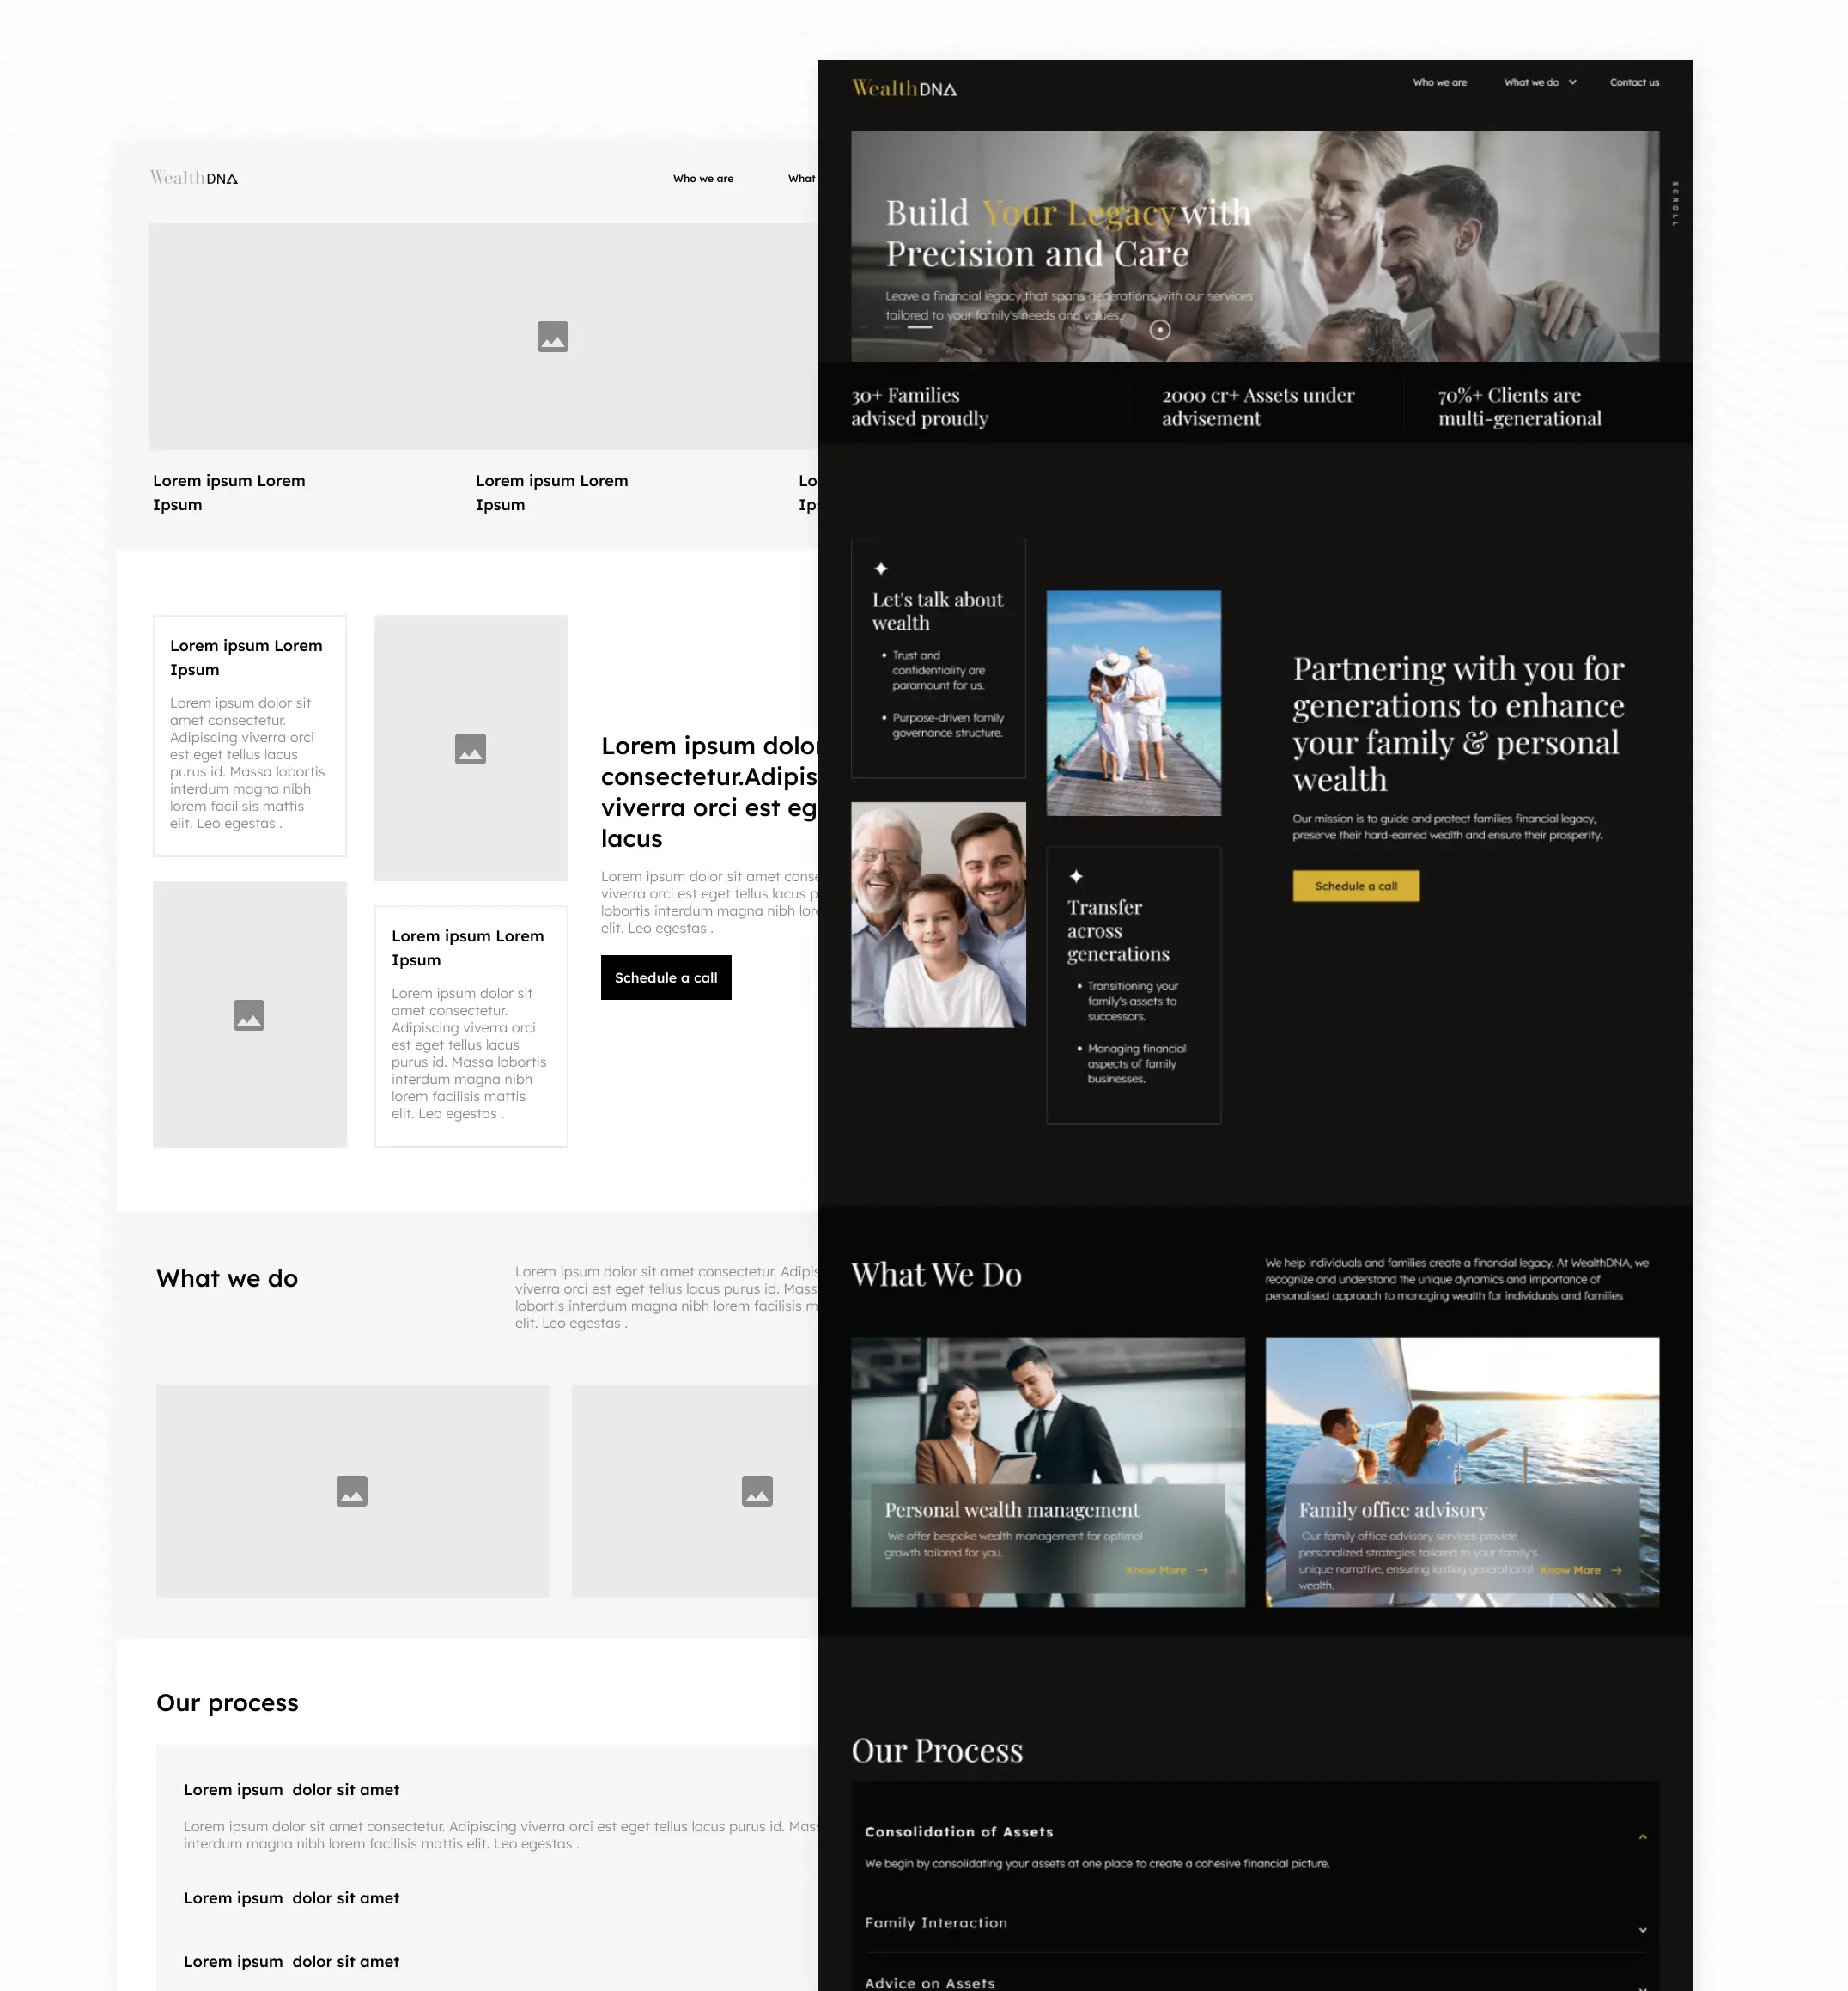 Design- Corporate website for family office business